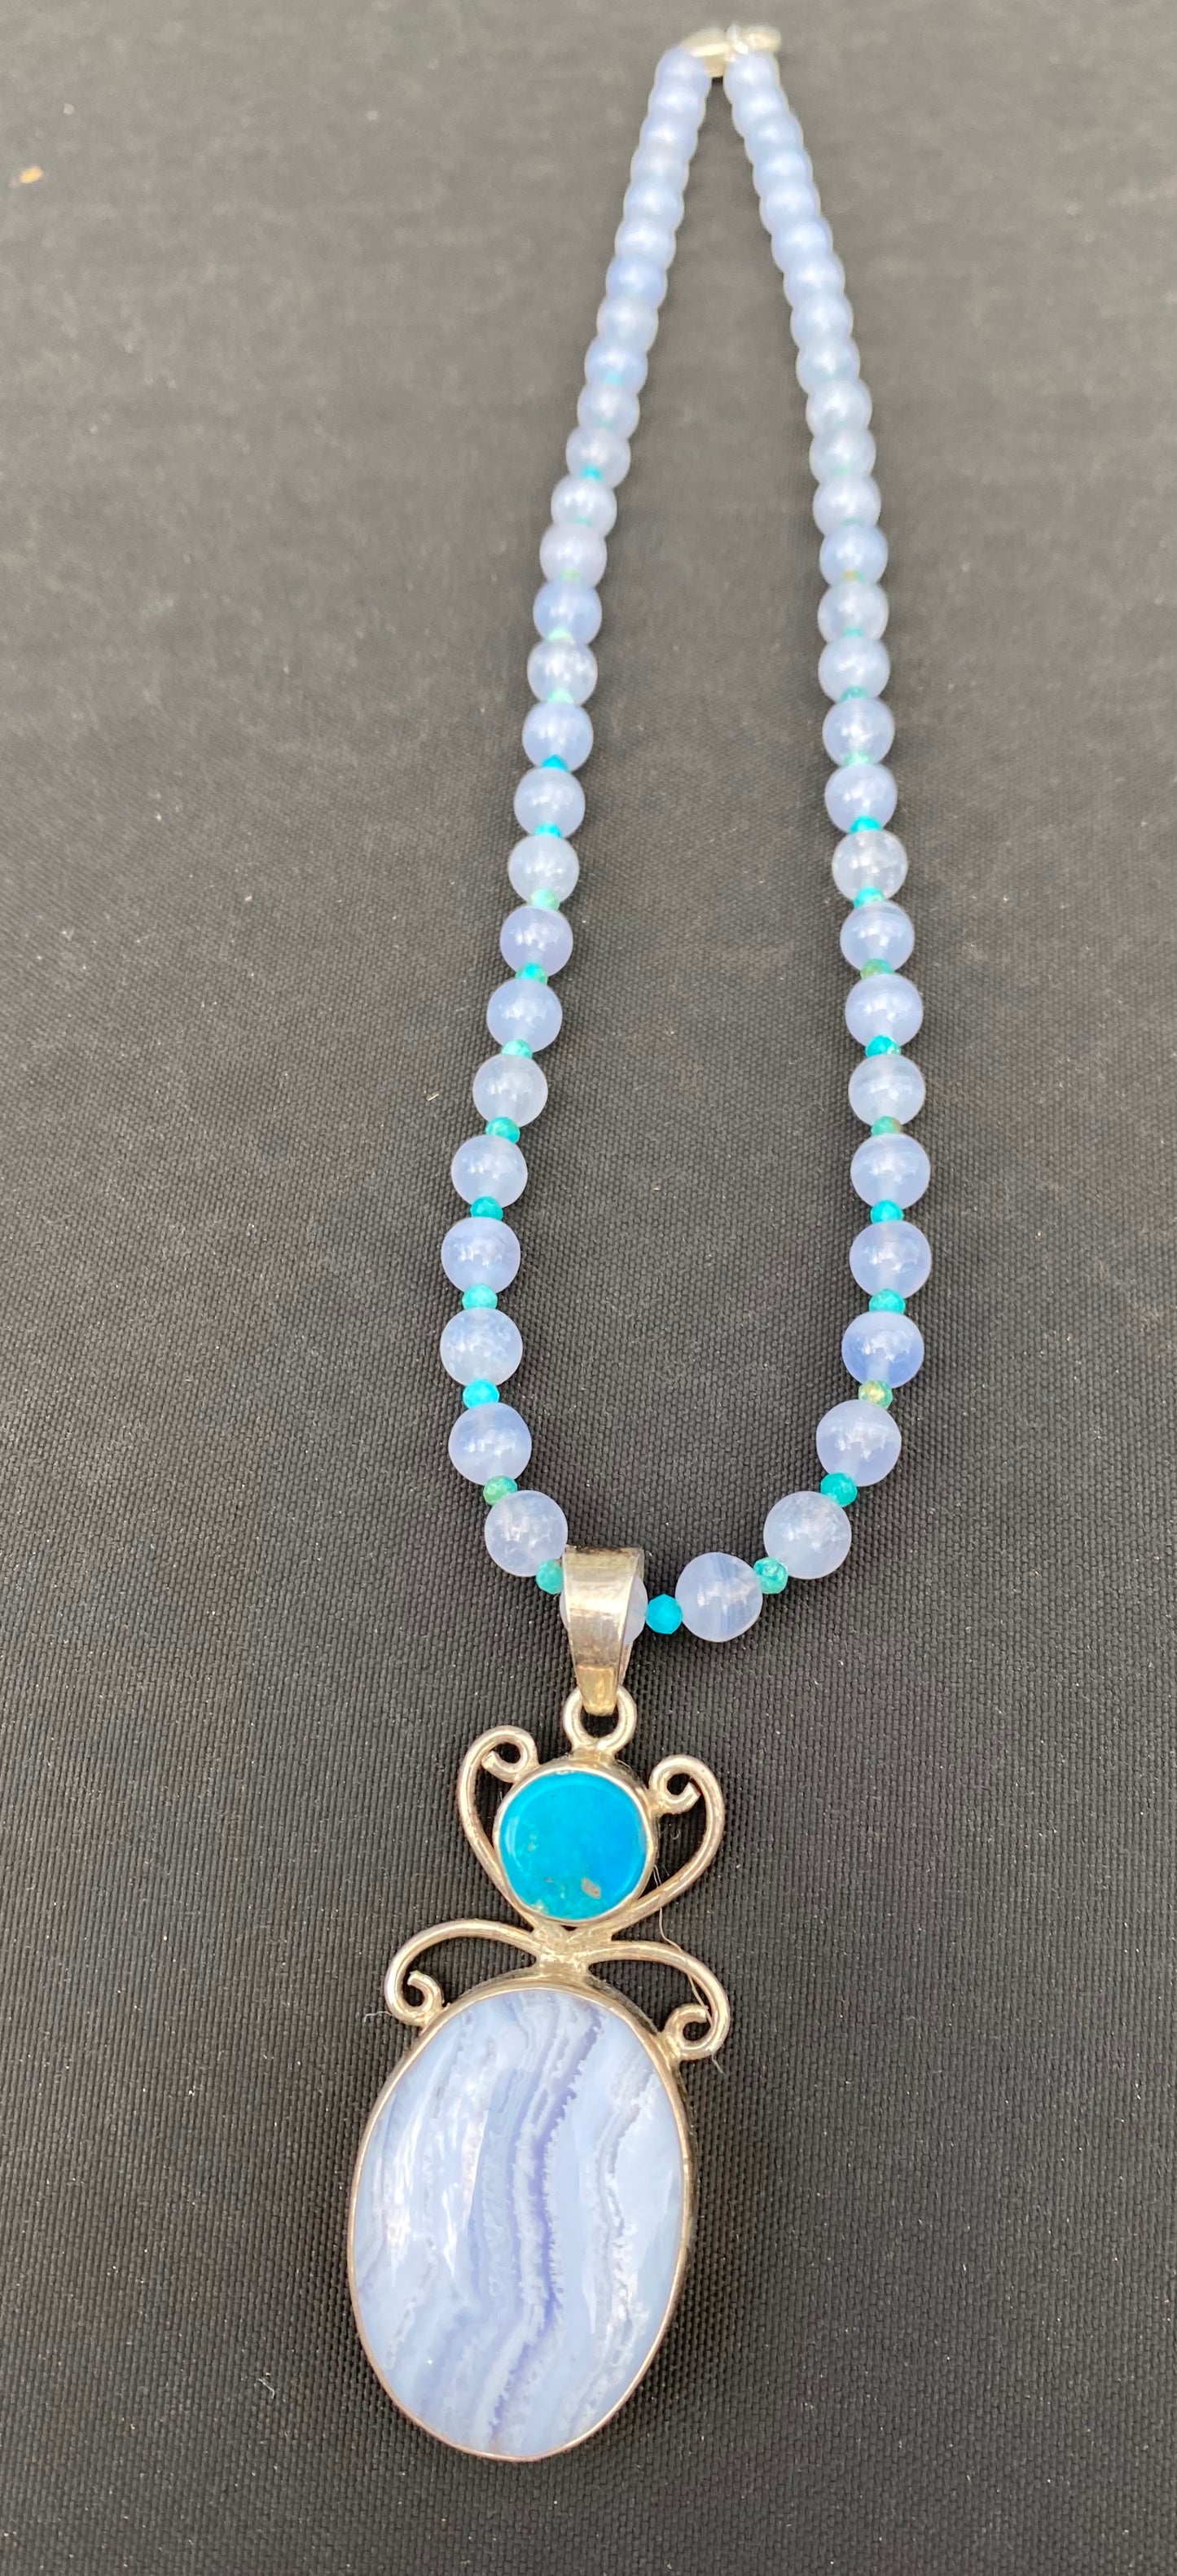 Blue Lace Agate and Turquoise Necklace